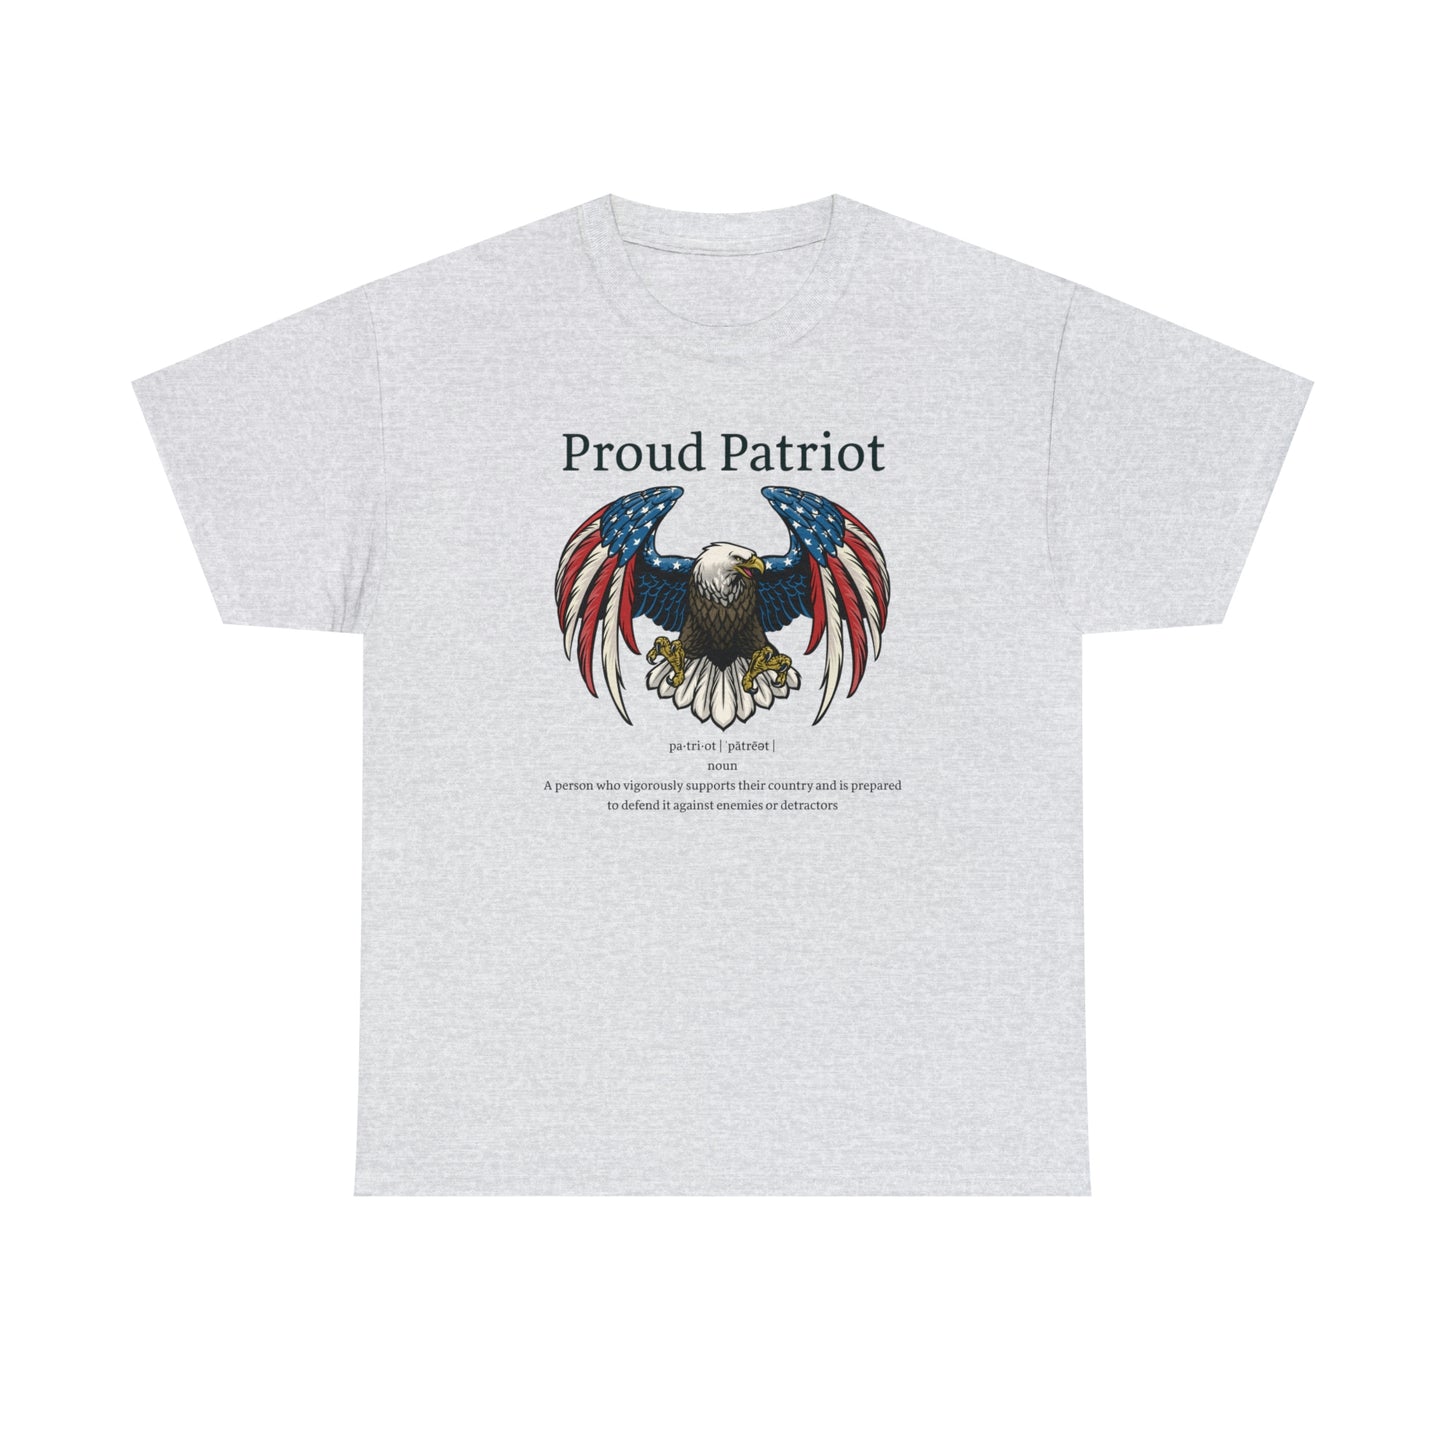 Patriotic T-Shirt For Patriot T Shirt For Conservative Gift For Veteran TShirt For Freedom Lover T Shirt For Armed Forces Shirt